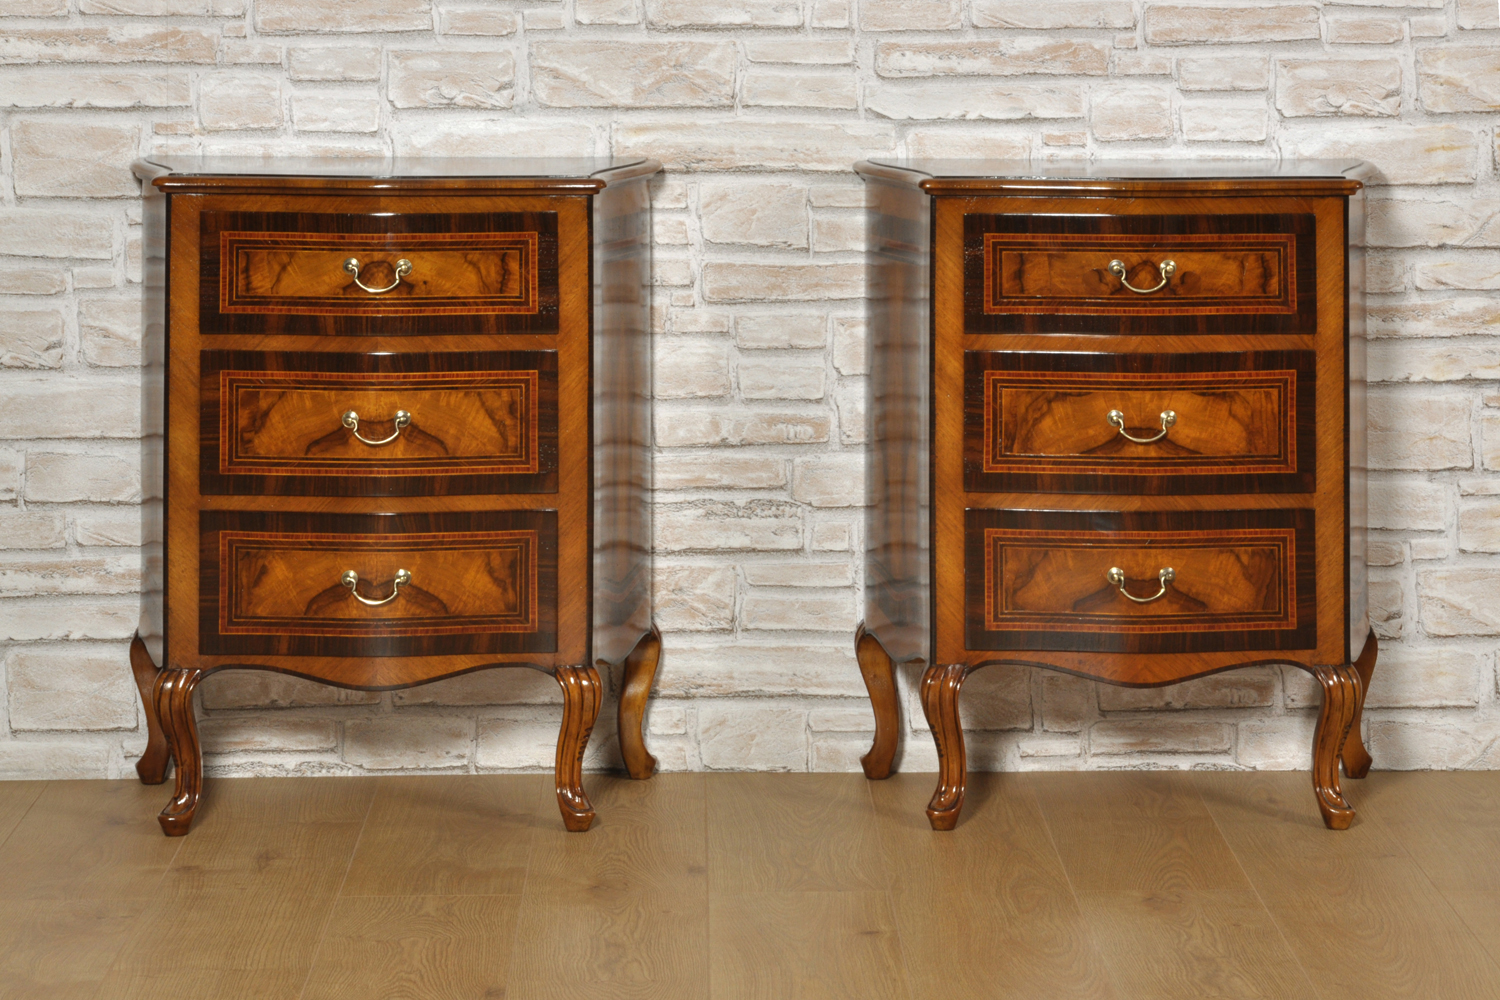 exclusive and precious pair of handmade inlaid walnut bedside cabinets with 3 drawers, luxury Italian made in Italy